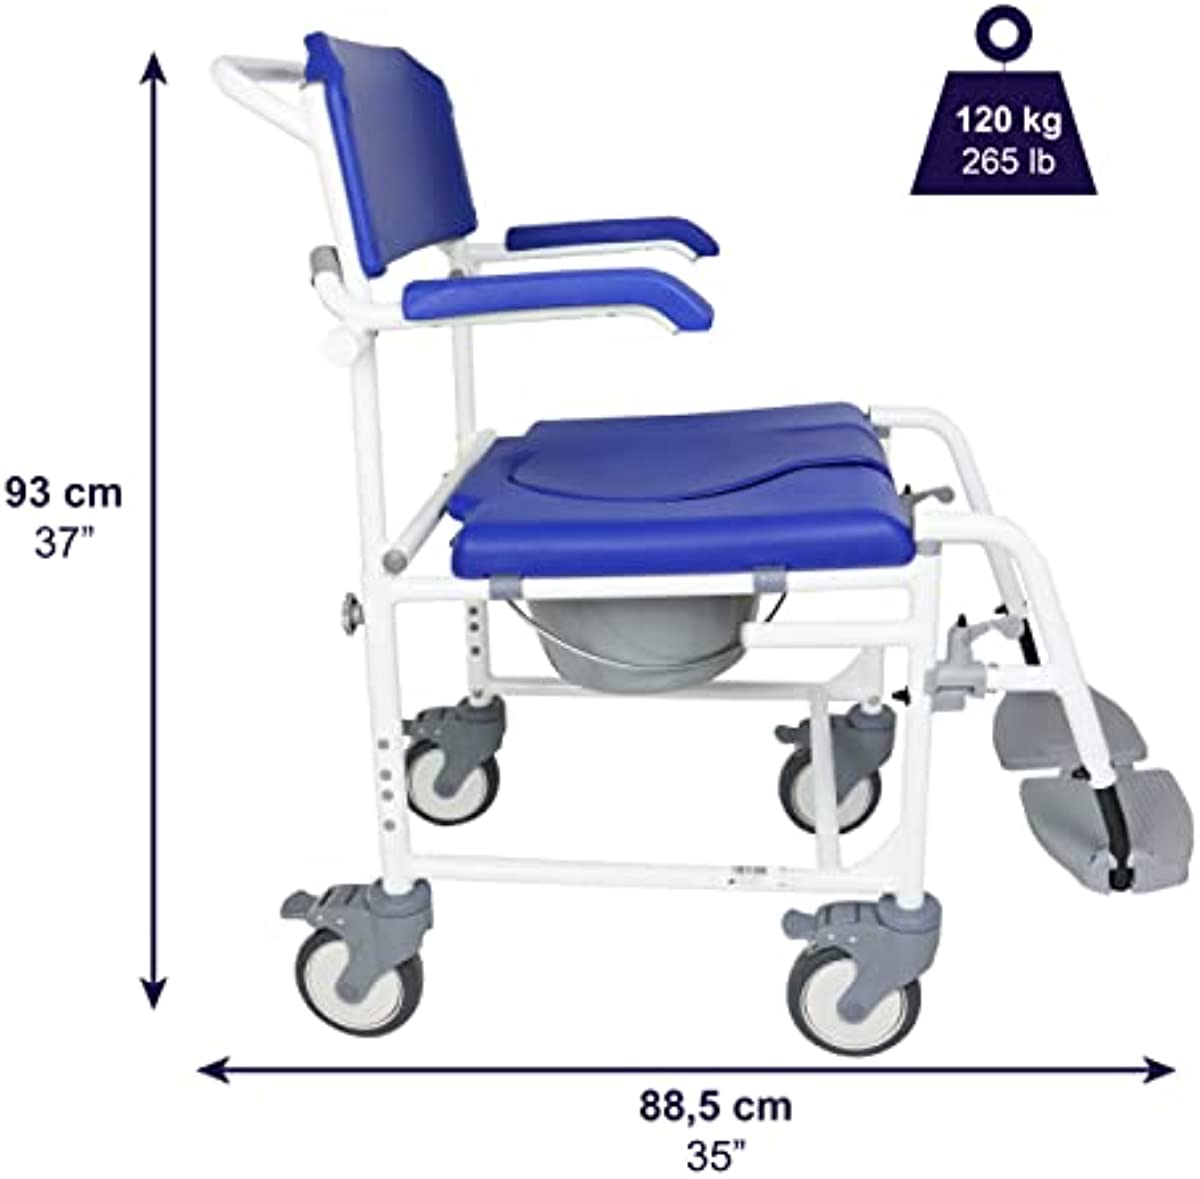 KMINA PRO - Shower Chair with Wheels, Handicap Shower Chair, Adjustable Shower Wheelchair for Elderly and Disabled, Rolling Shower Chair for Inside Shower, Roll in Shower Chair, Transport Commode